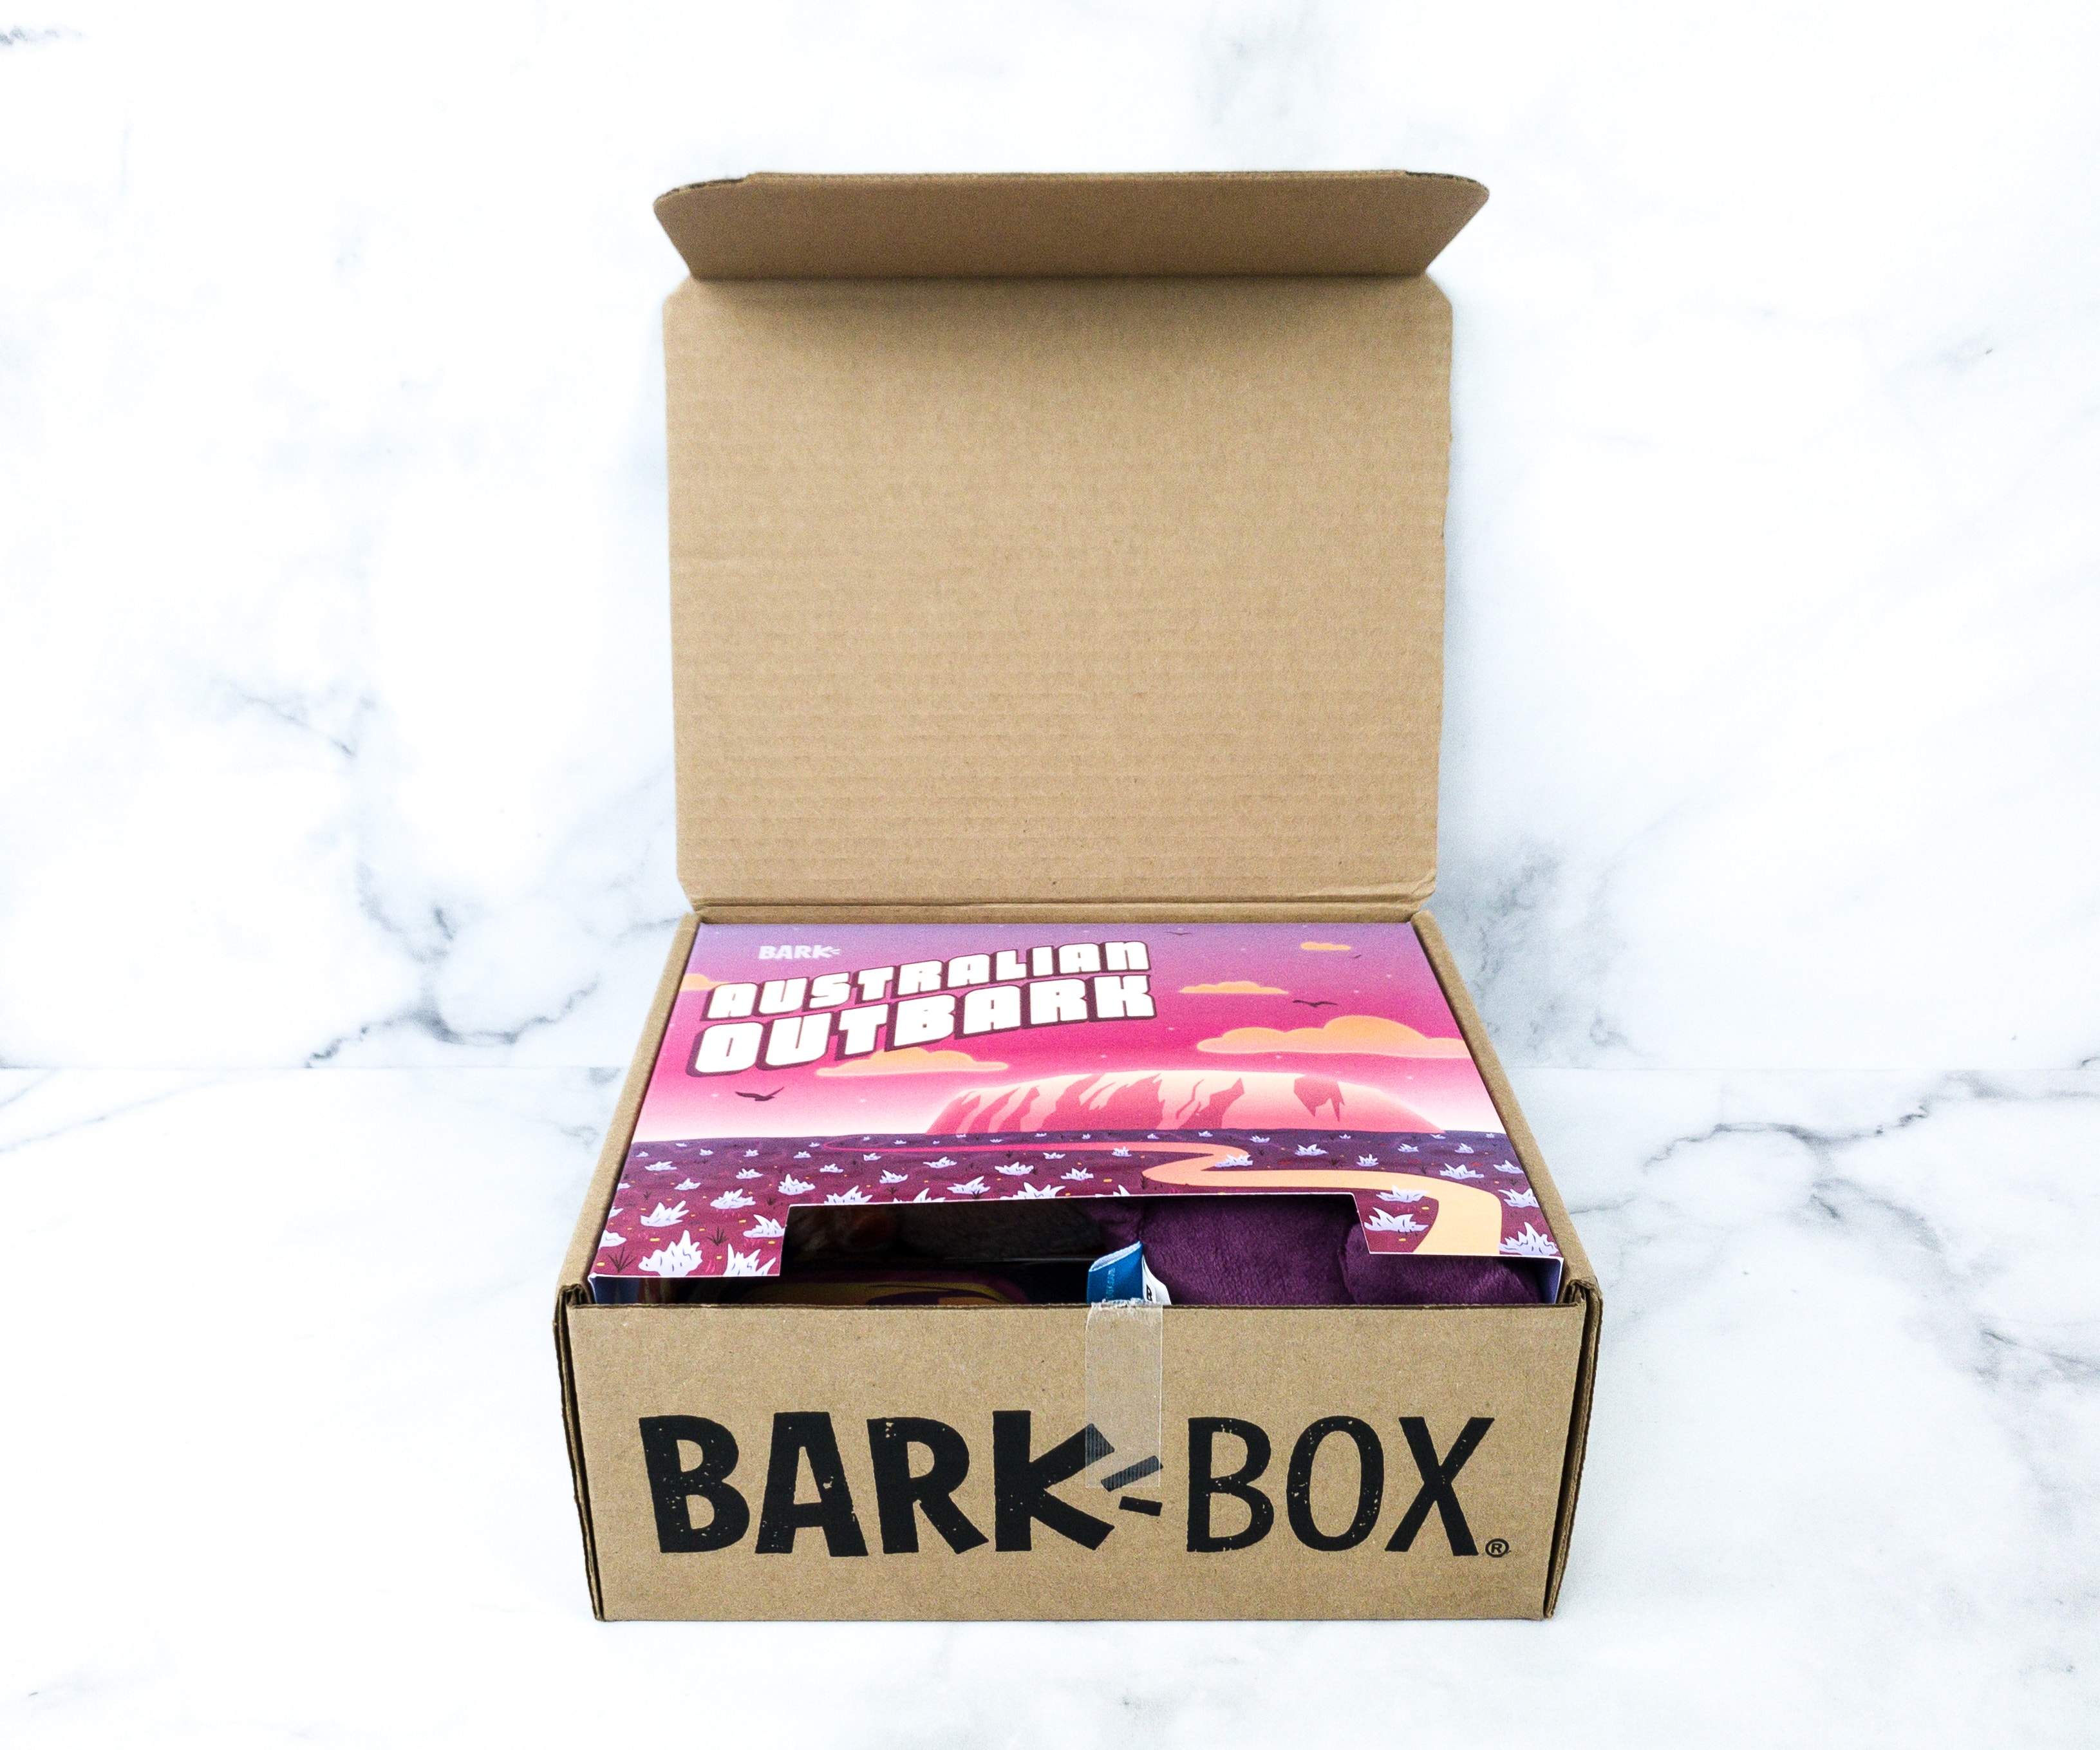 Barkbox March 2020 Subscription Box Review + Coupon - Hello Subscription